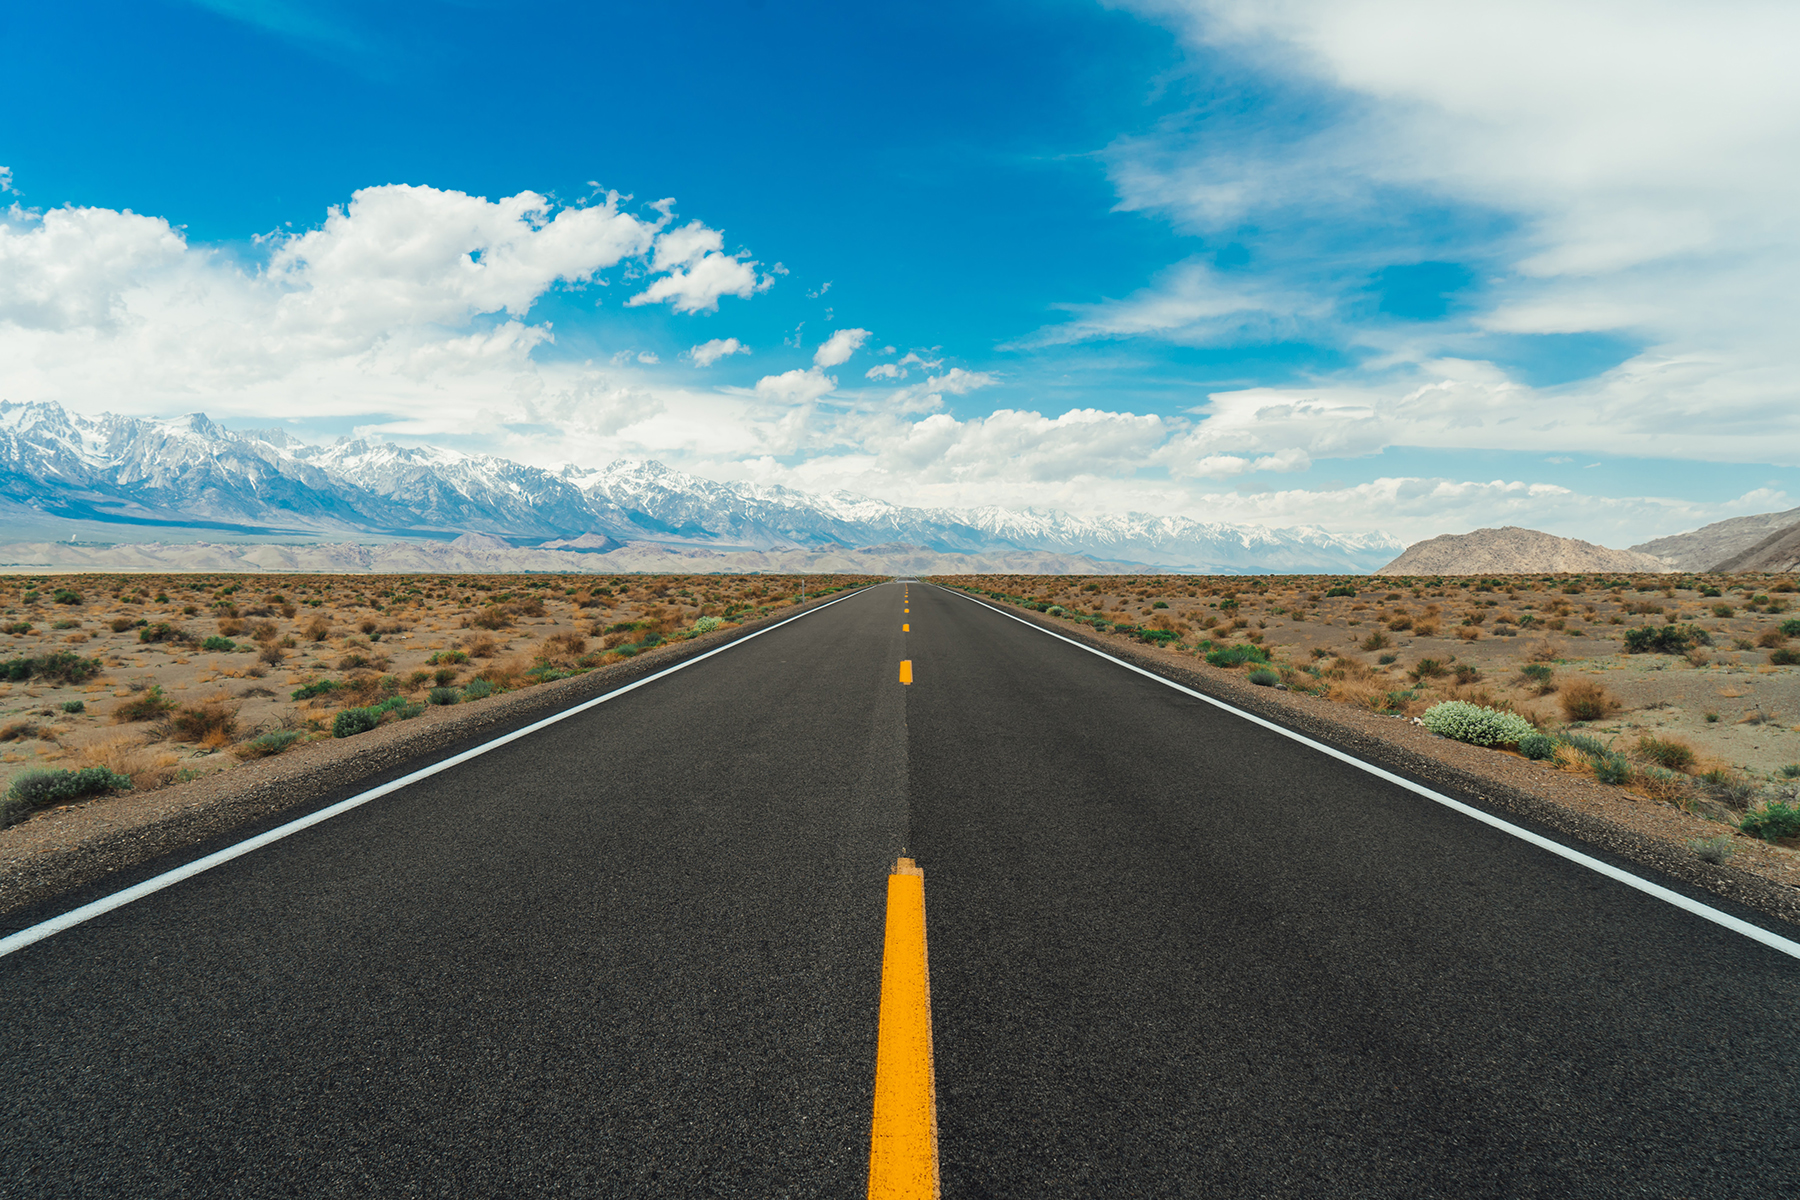 Image shows a divided highway with a barren landscape on the sides.